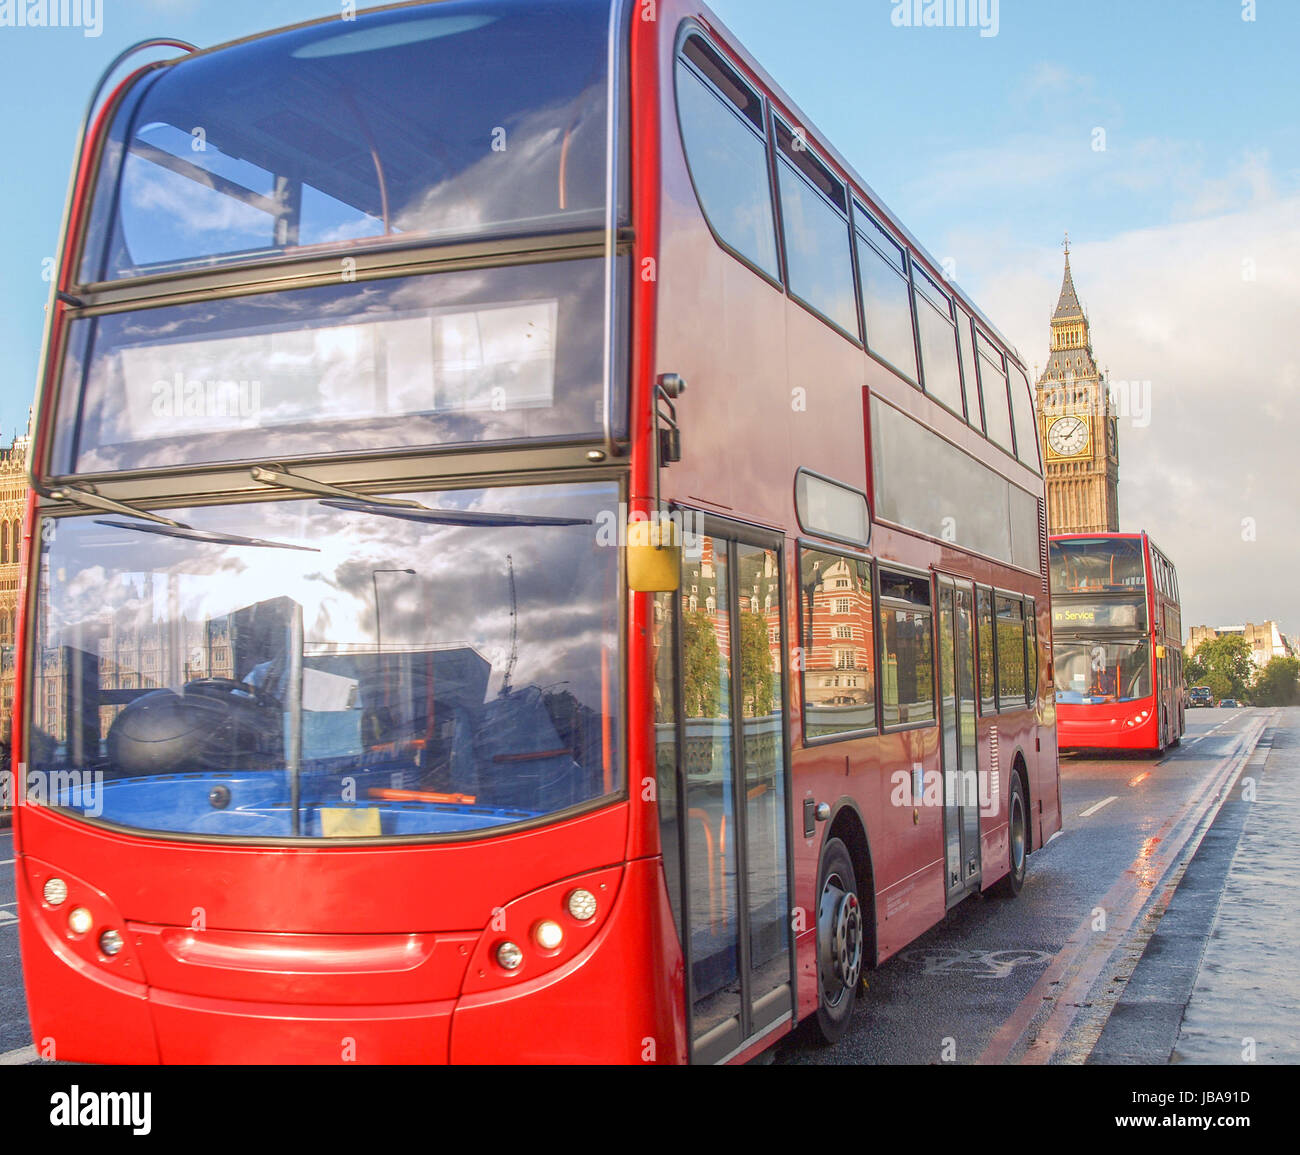 London double decker bus crossing Westminster Bridge in front of the Houses of Parliament and Big Ben Stock Photo